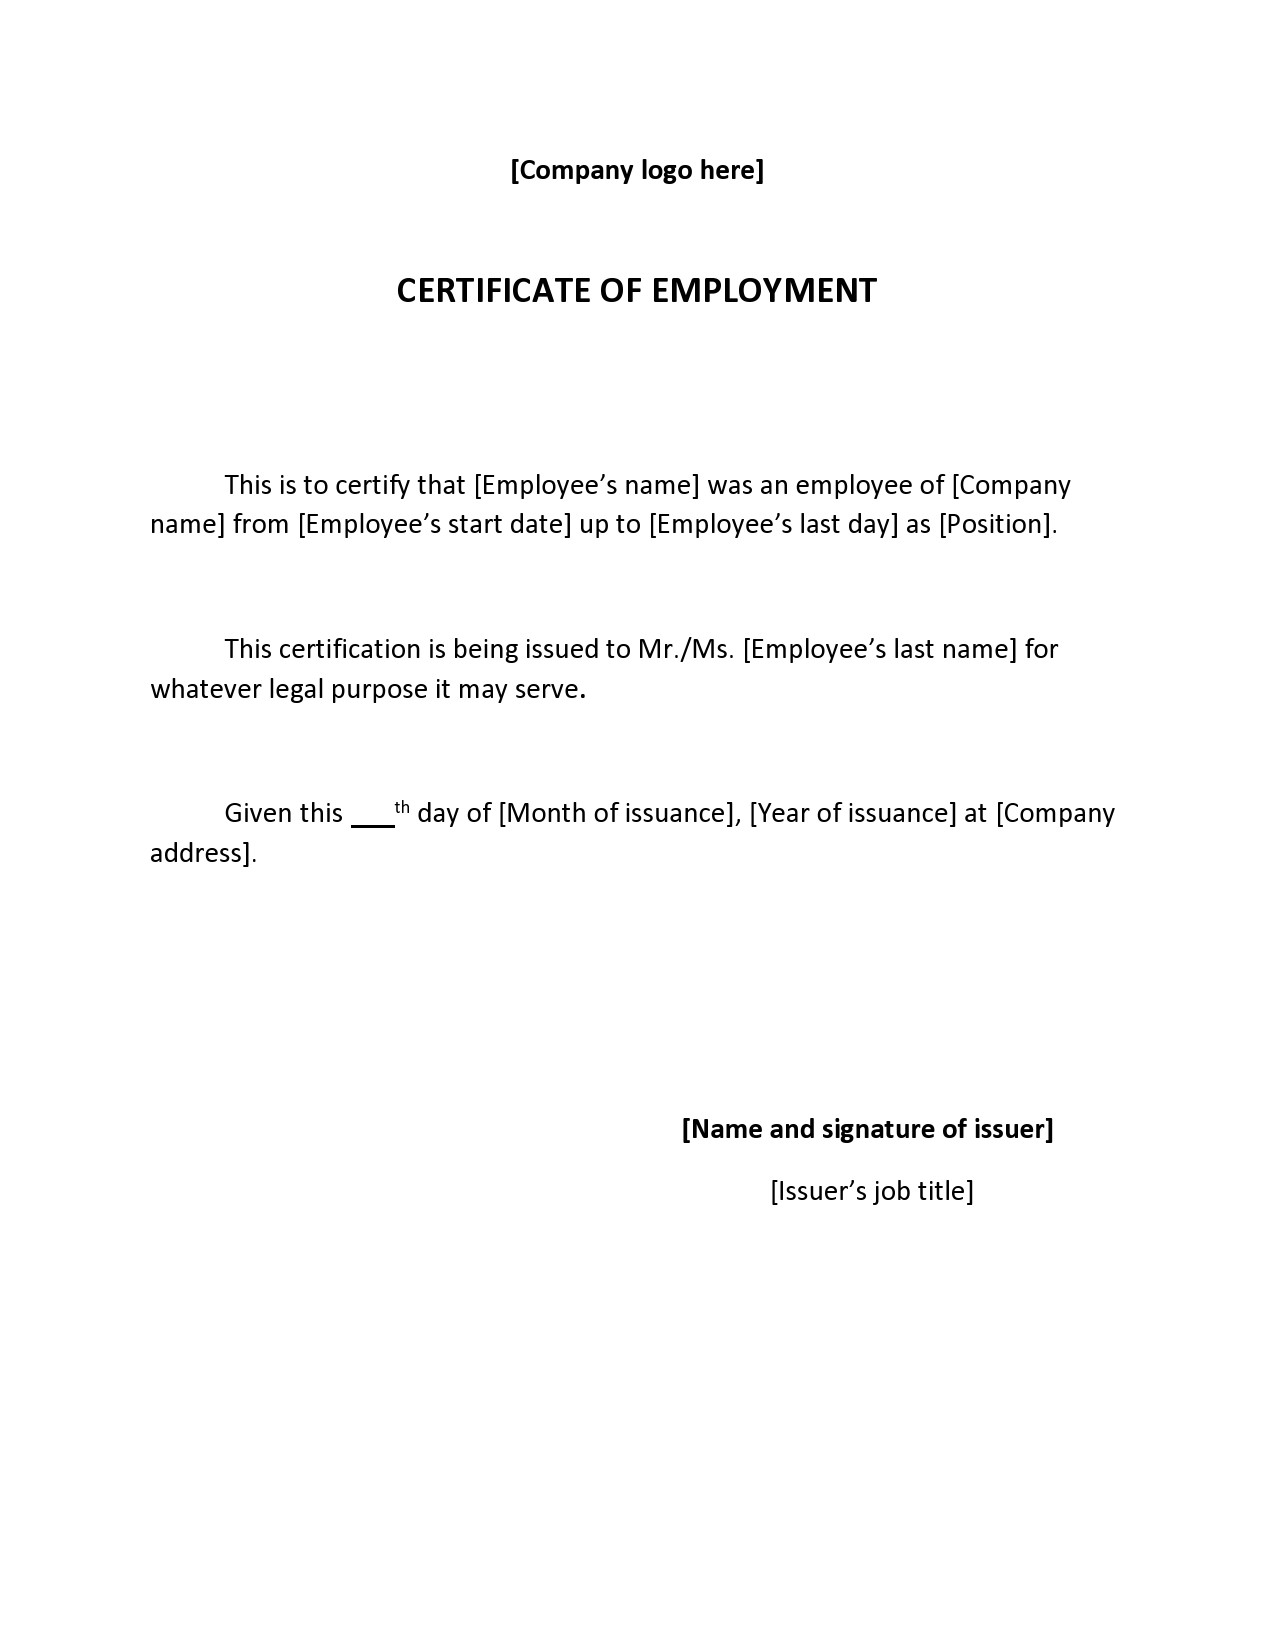 40 Best Certificate Of Employment Samples Free ᐅ TemplateLab